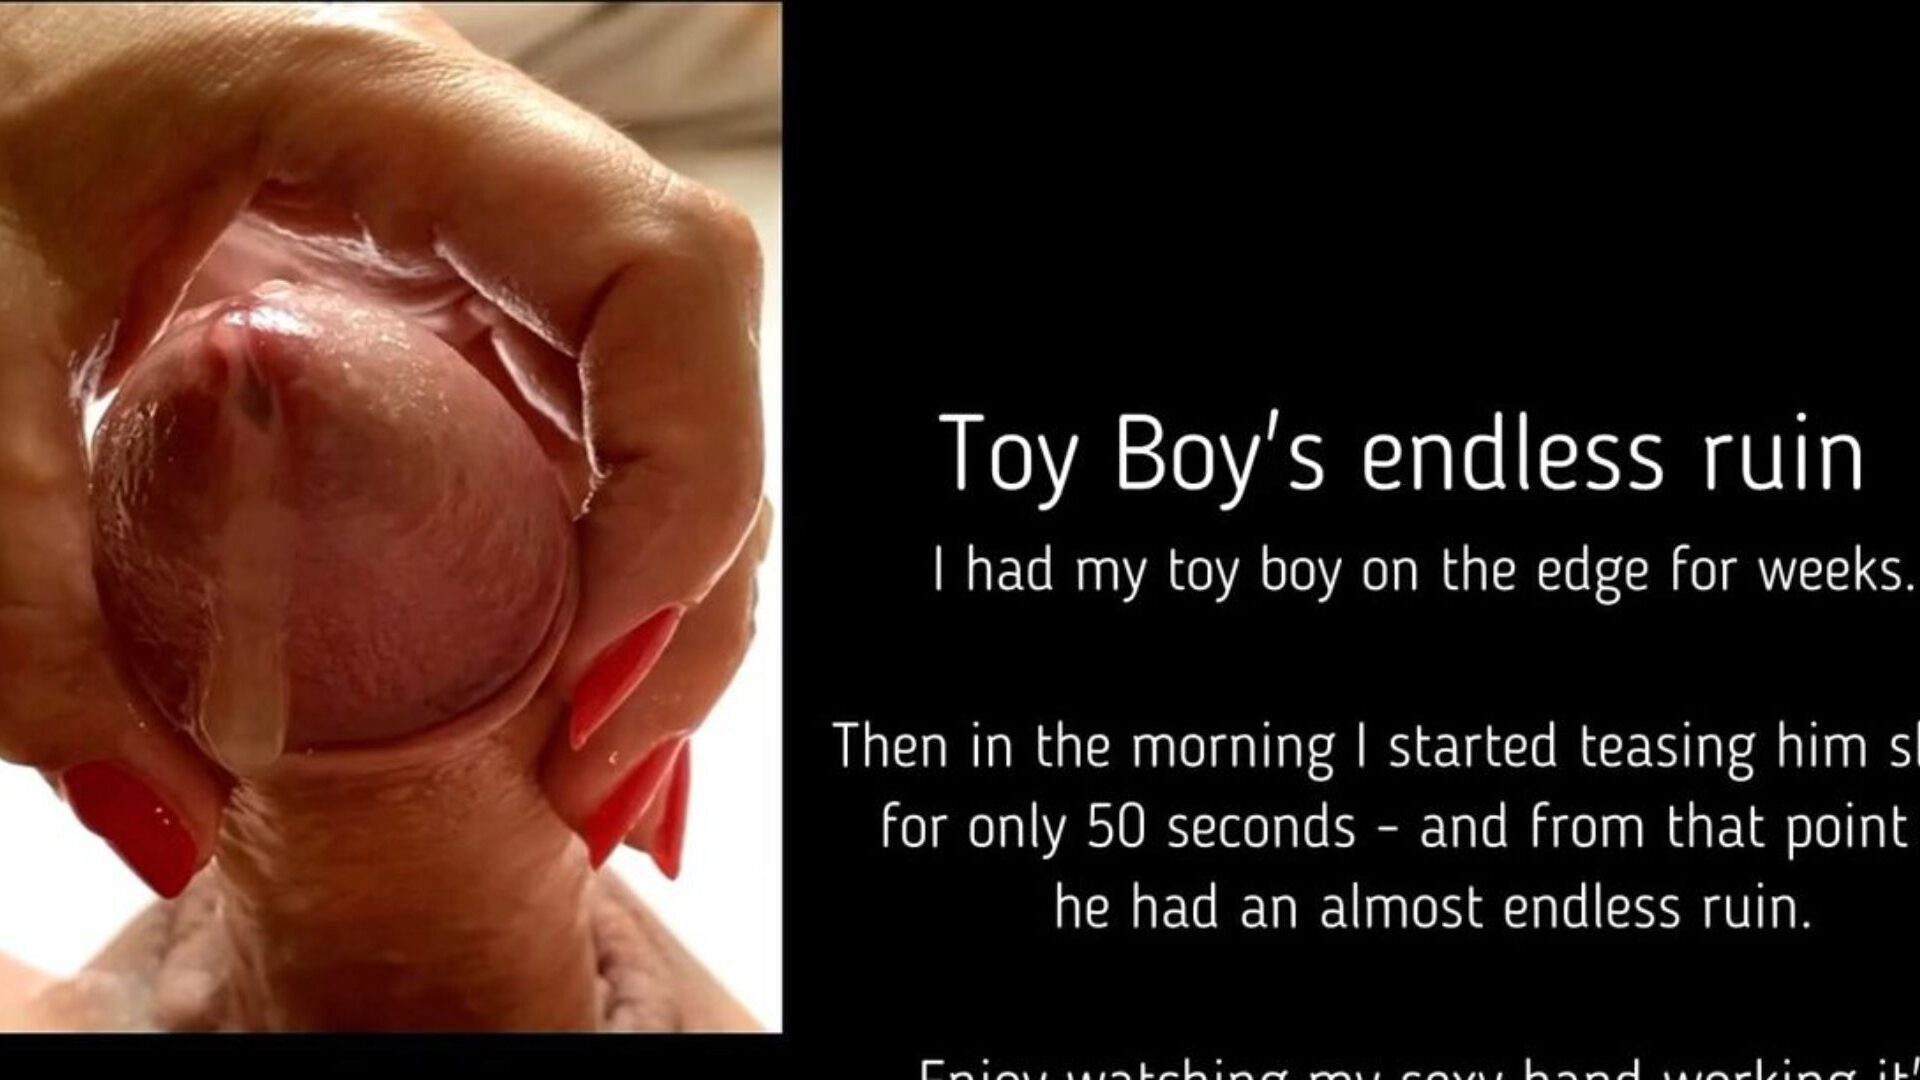 Toy Boy's never-ending wreck After teasing my toy chap for weeks - it took me only 50 seconds this morning to begin an raging jizz run in rivulets that lastet  forever  out of my plaything boy indeed having an big O - I love it!